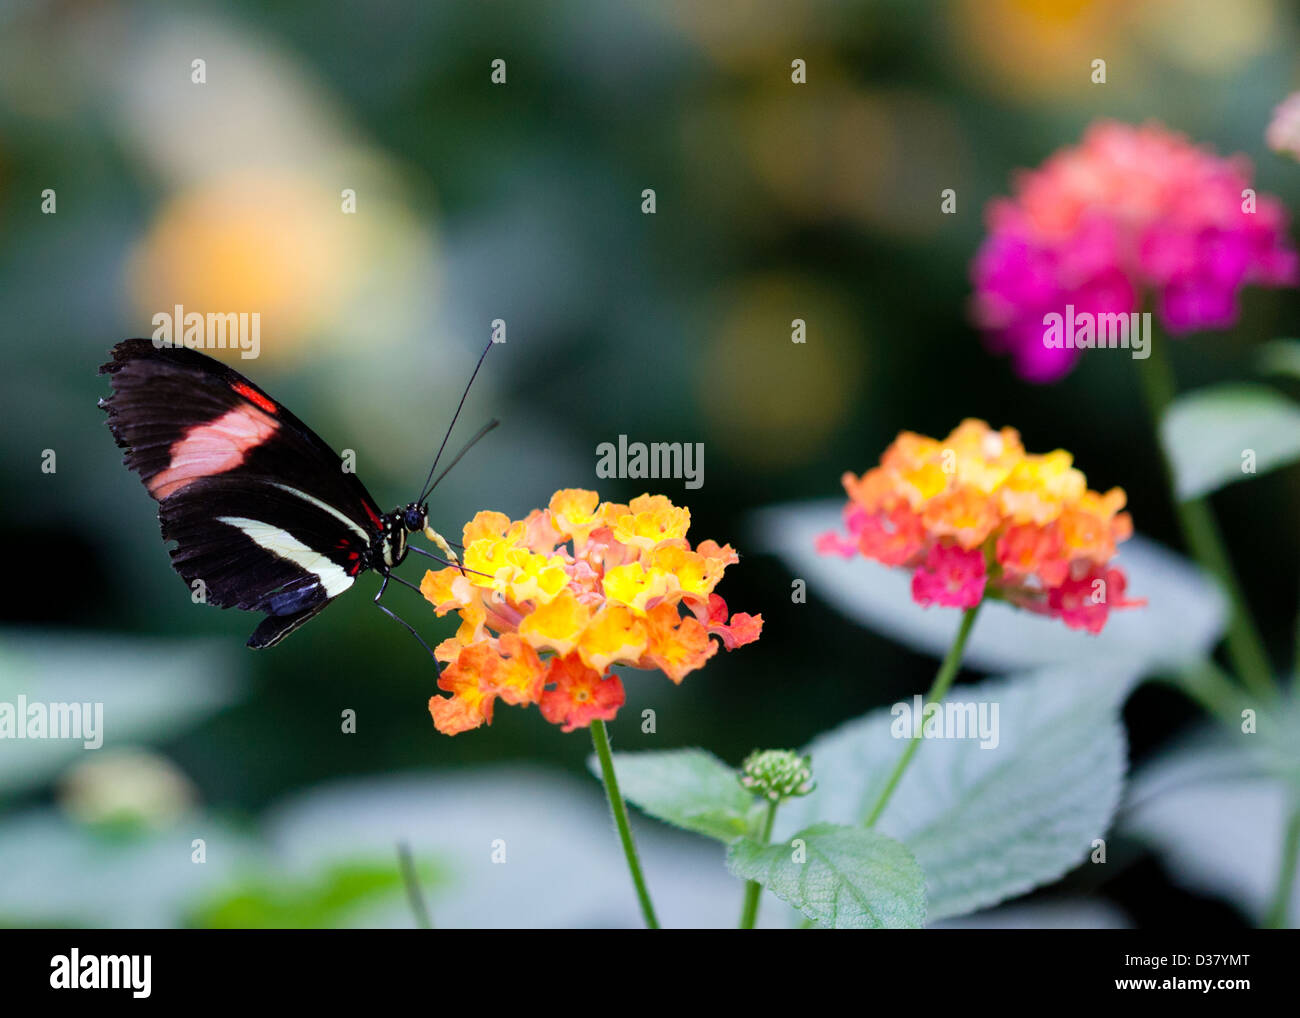 The Postman Butterfly (Heliconius melpomene) Sipping Nectar From A Flower Stock Photo